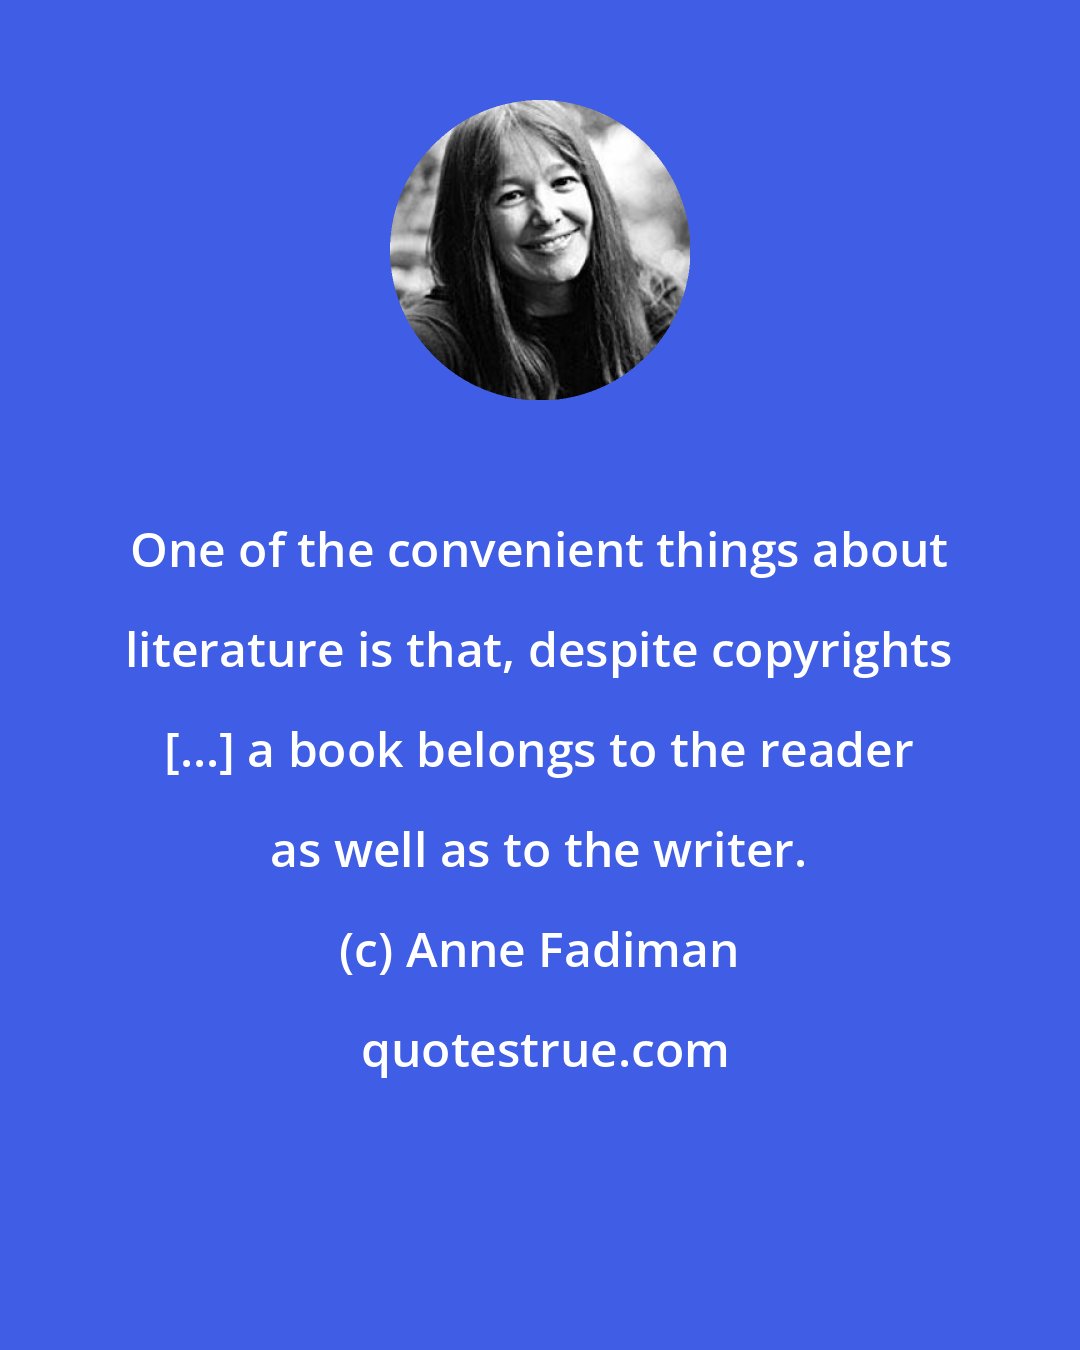 Anne Fadiman: One of the convenient things about literature is that, despite copyrights [...] a book belongs to the reader as well as to the writer.